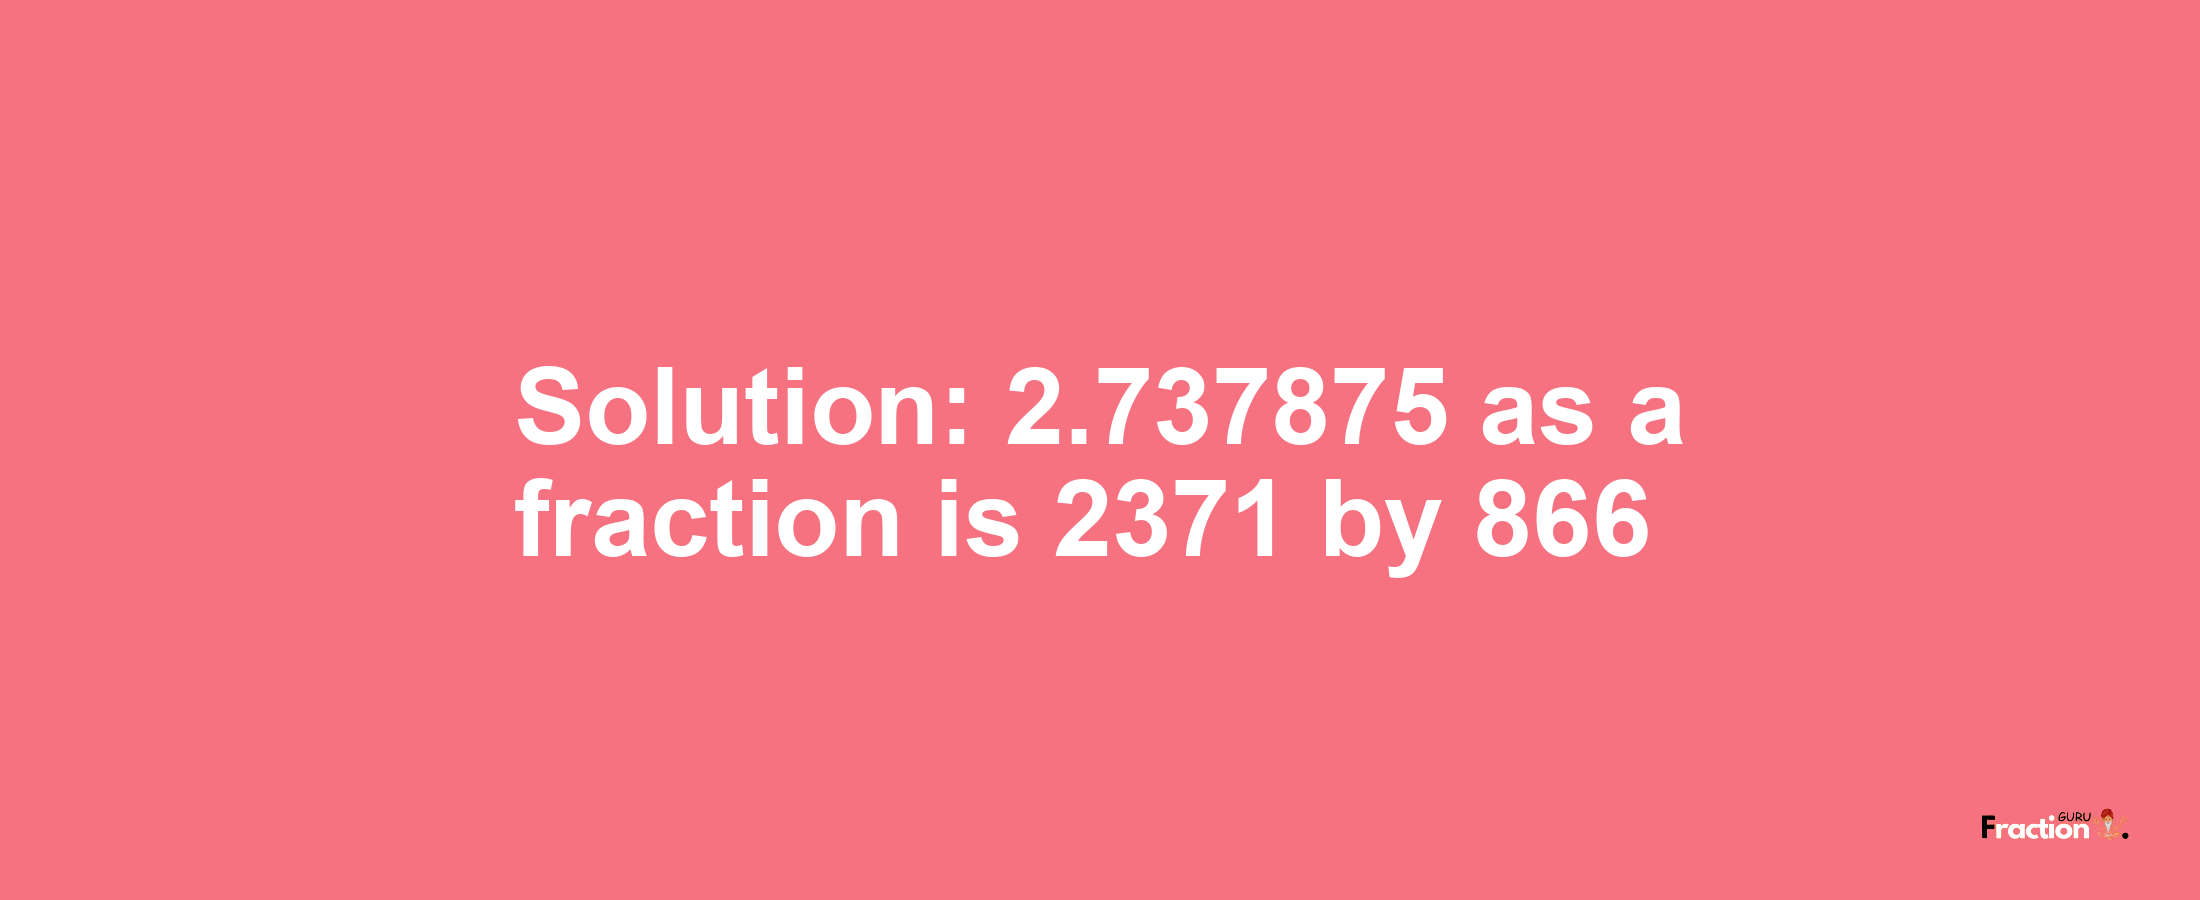 Solution:2.737875 as a fraction is 2371/866